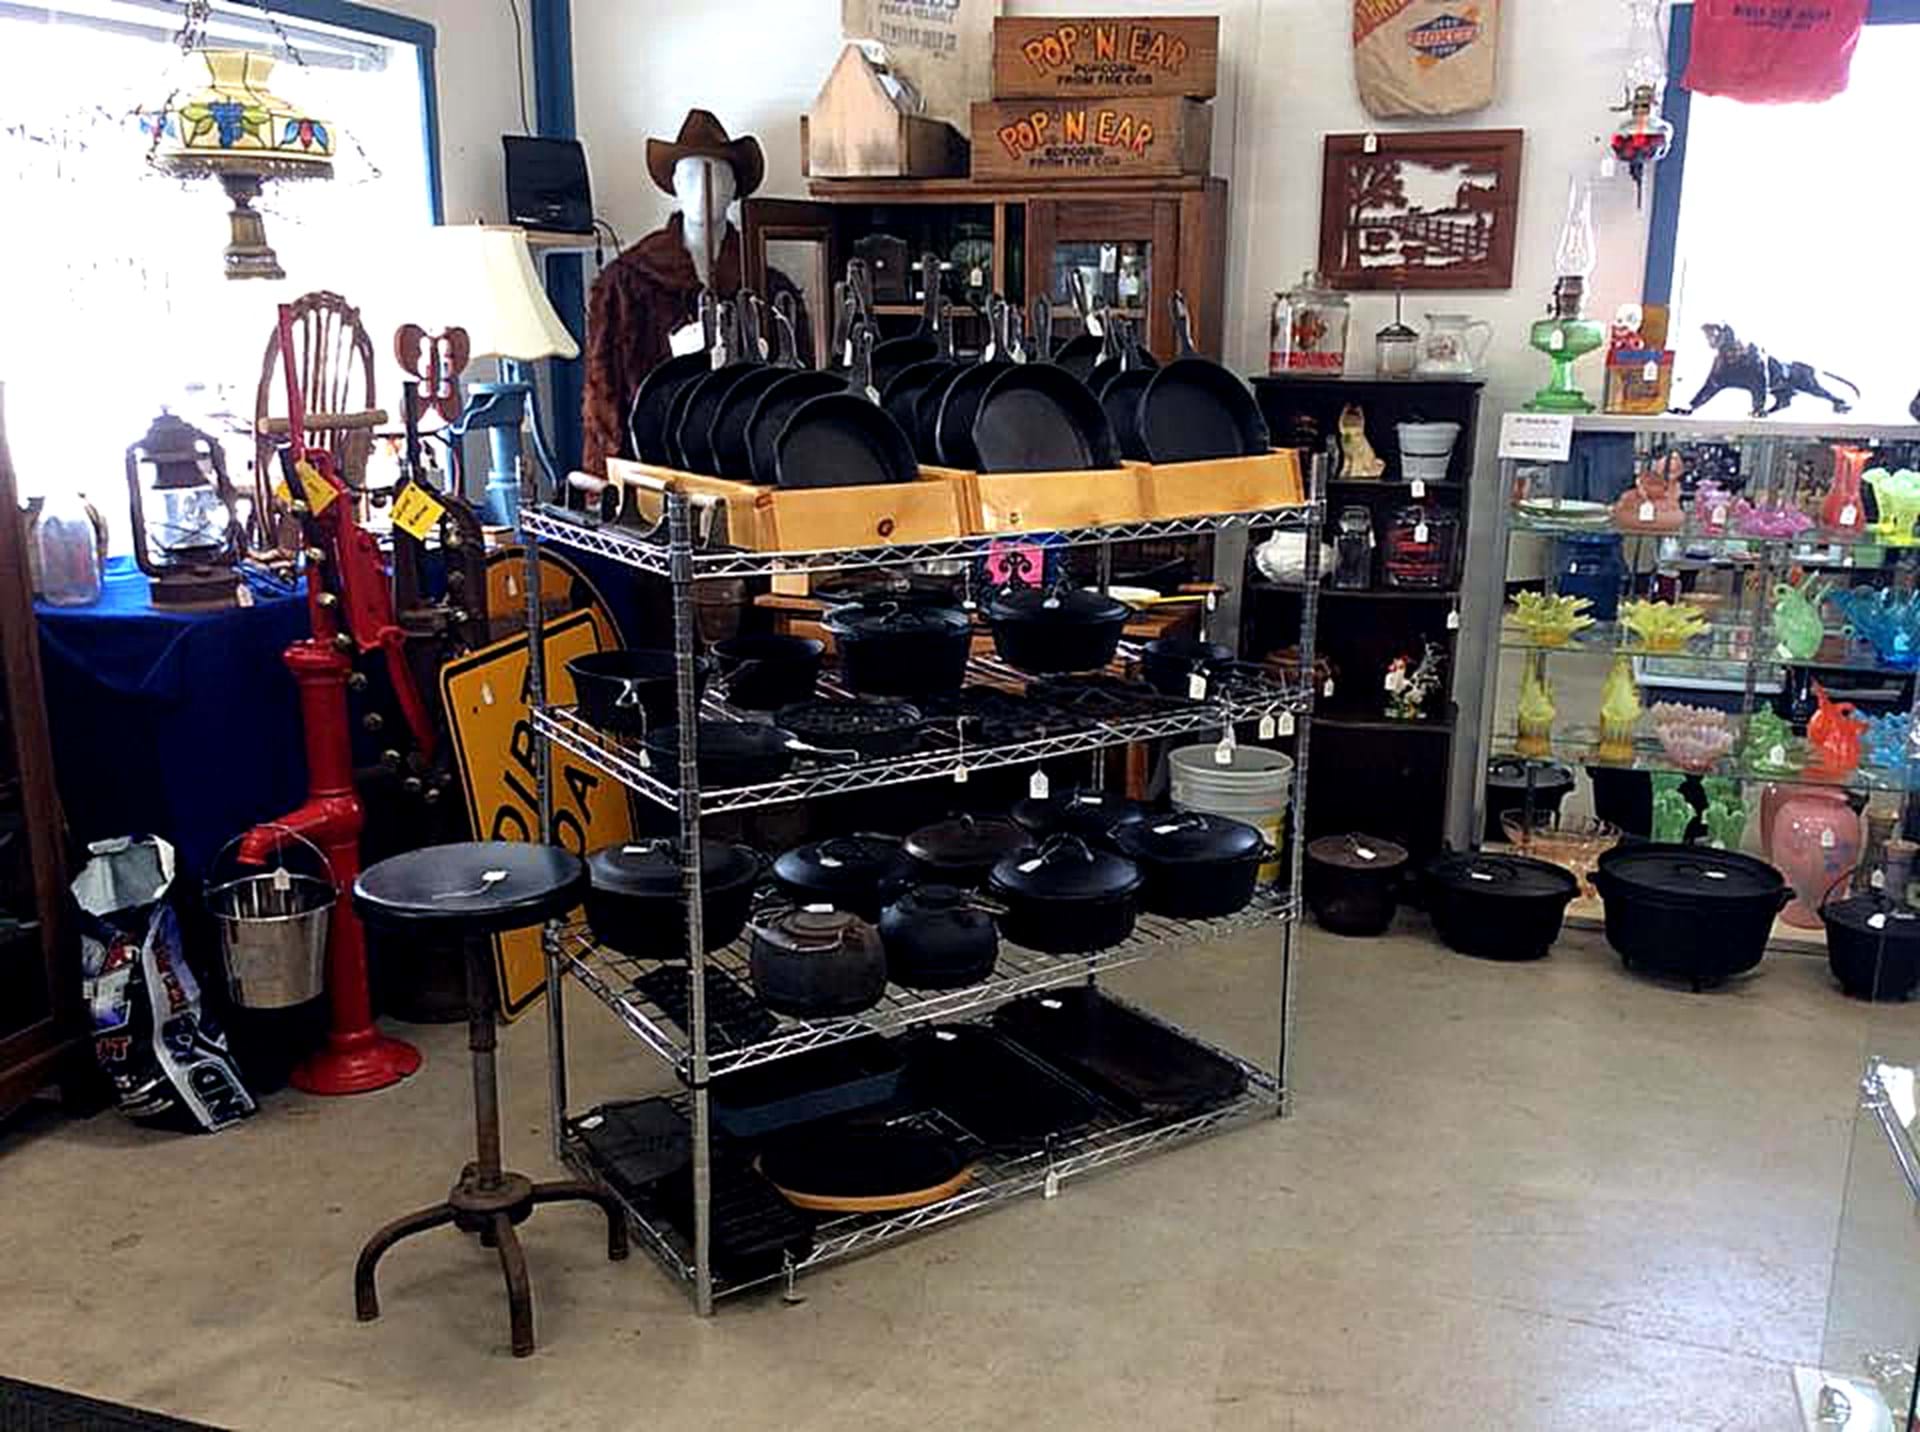 Cast Iron cookware display